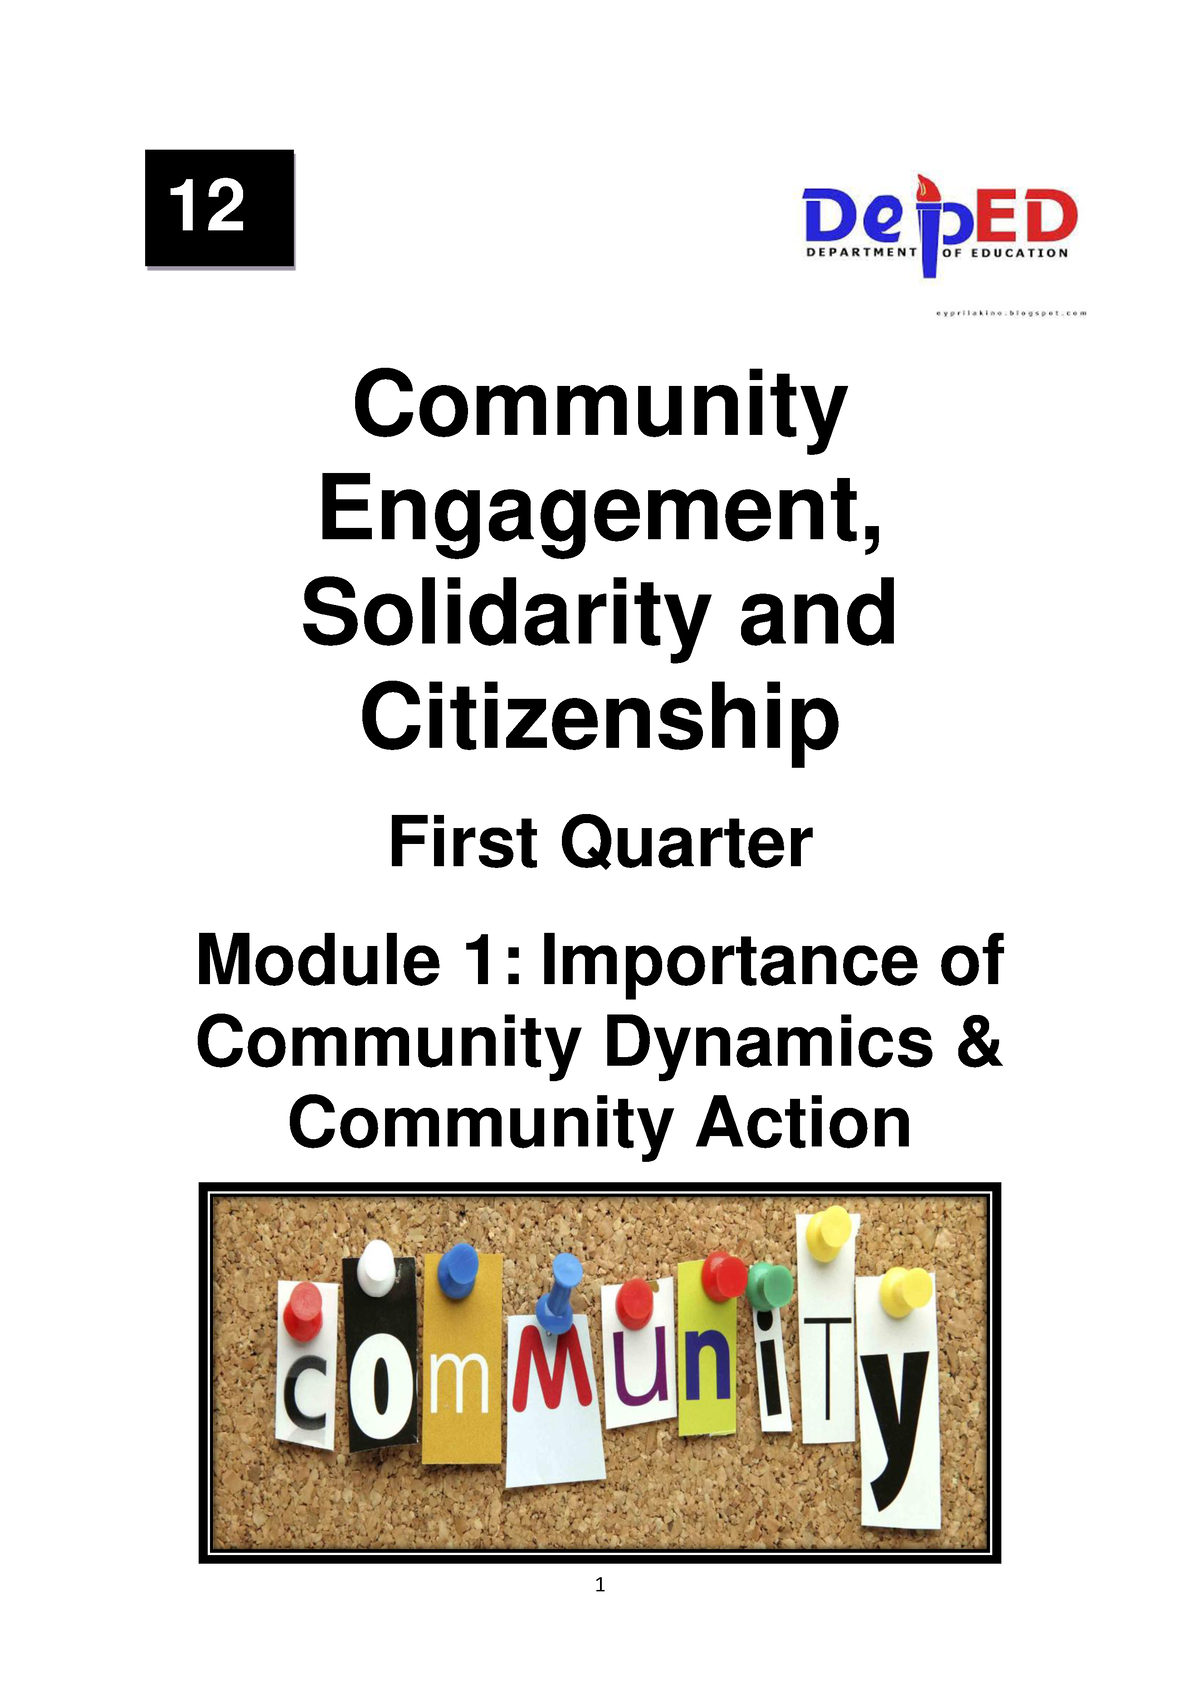 community dynamics and community action essay